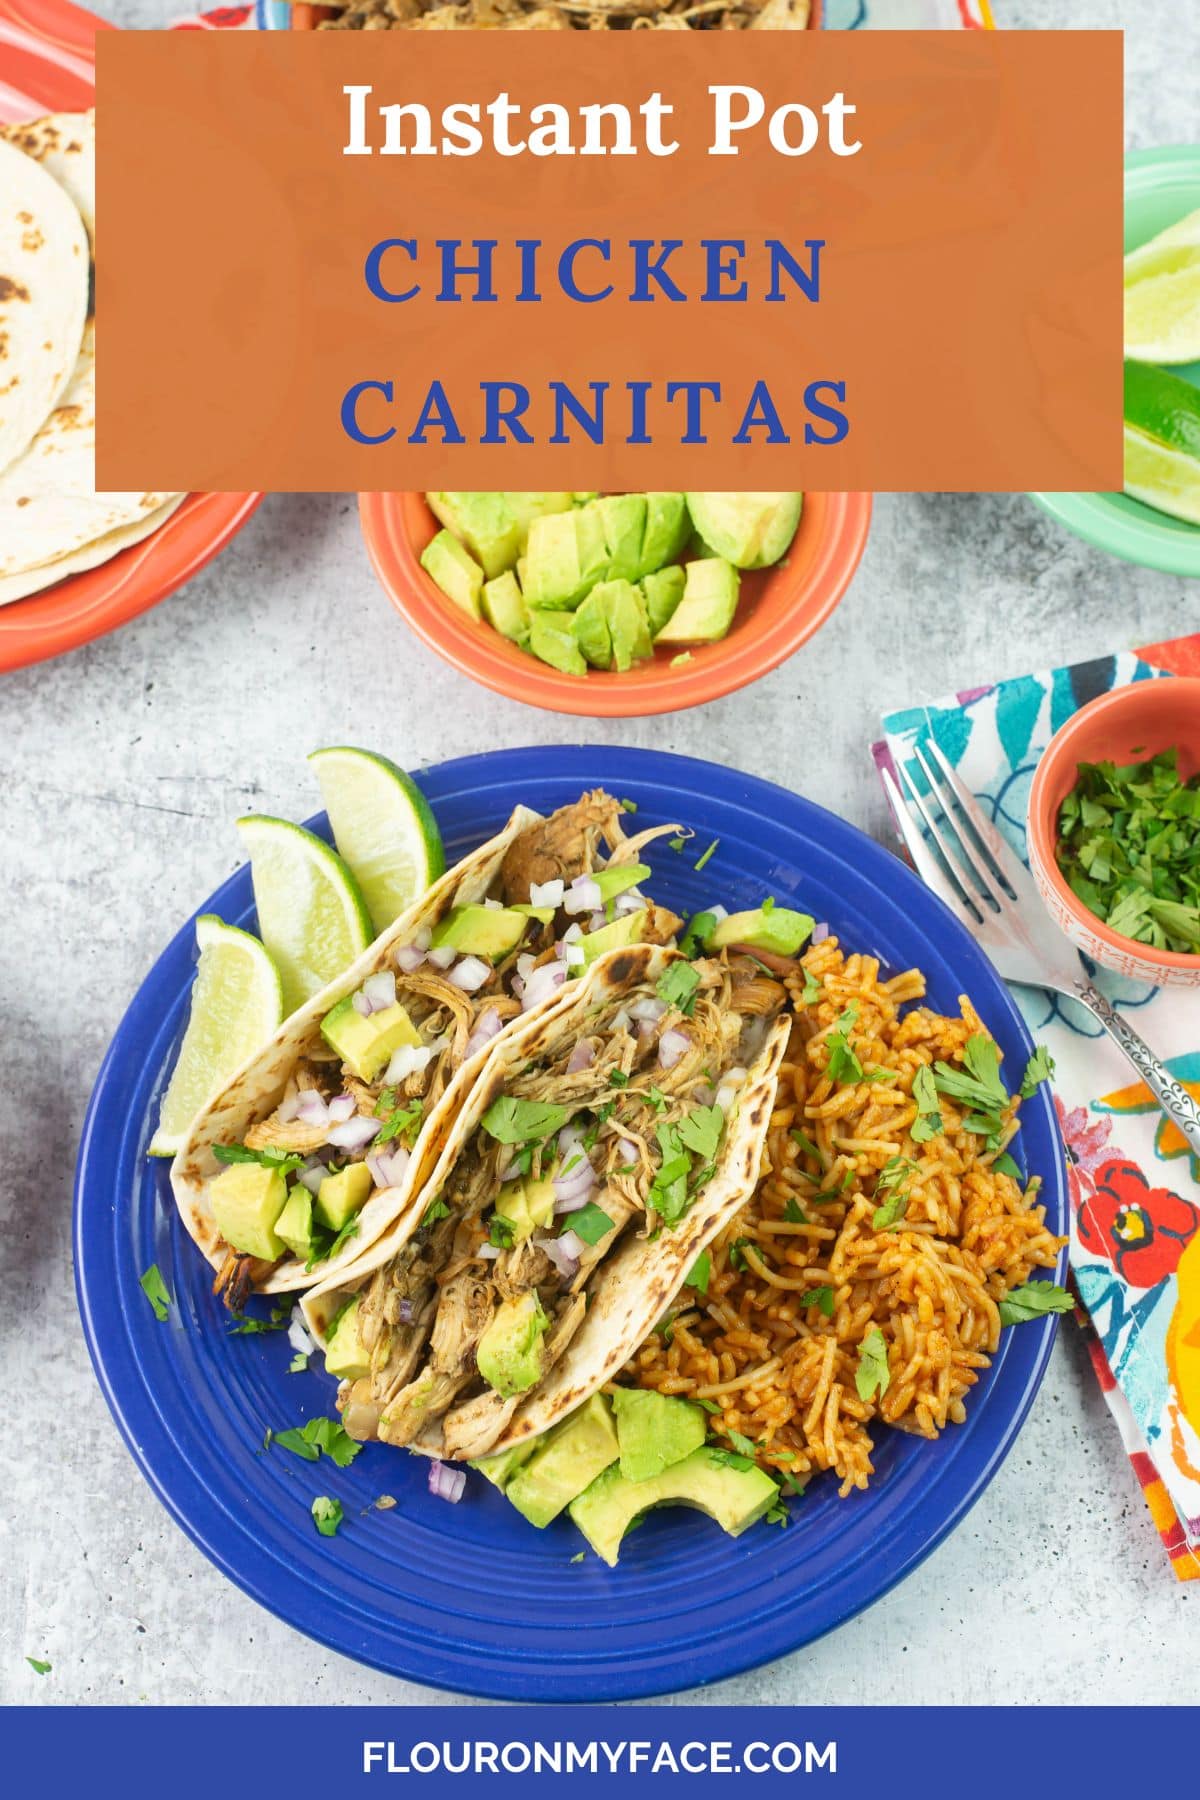 Vertical image of carnitas garnished with avocado and diced onion on a plate.